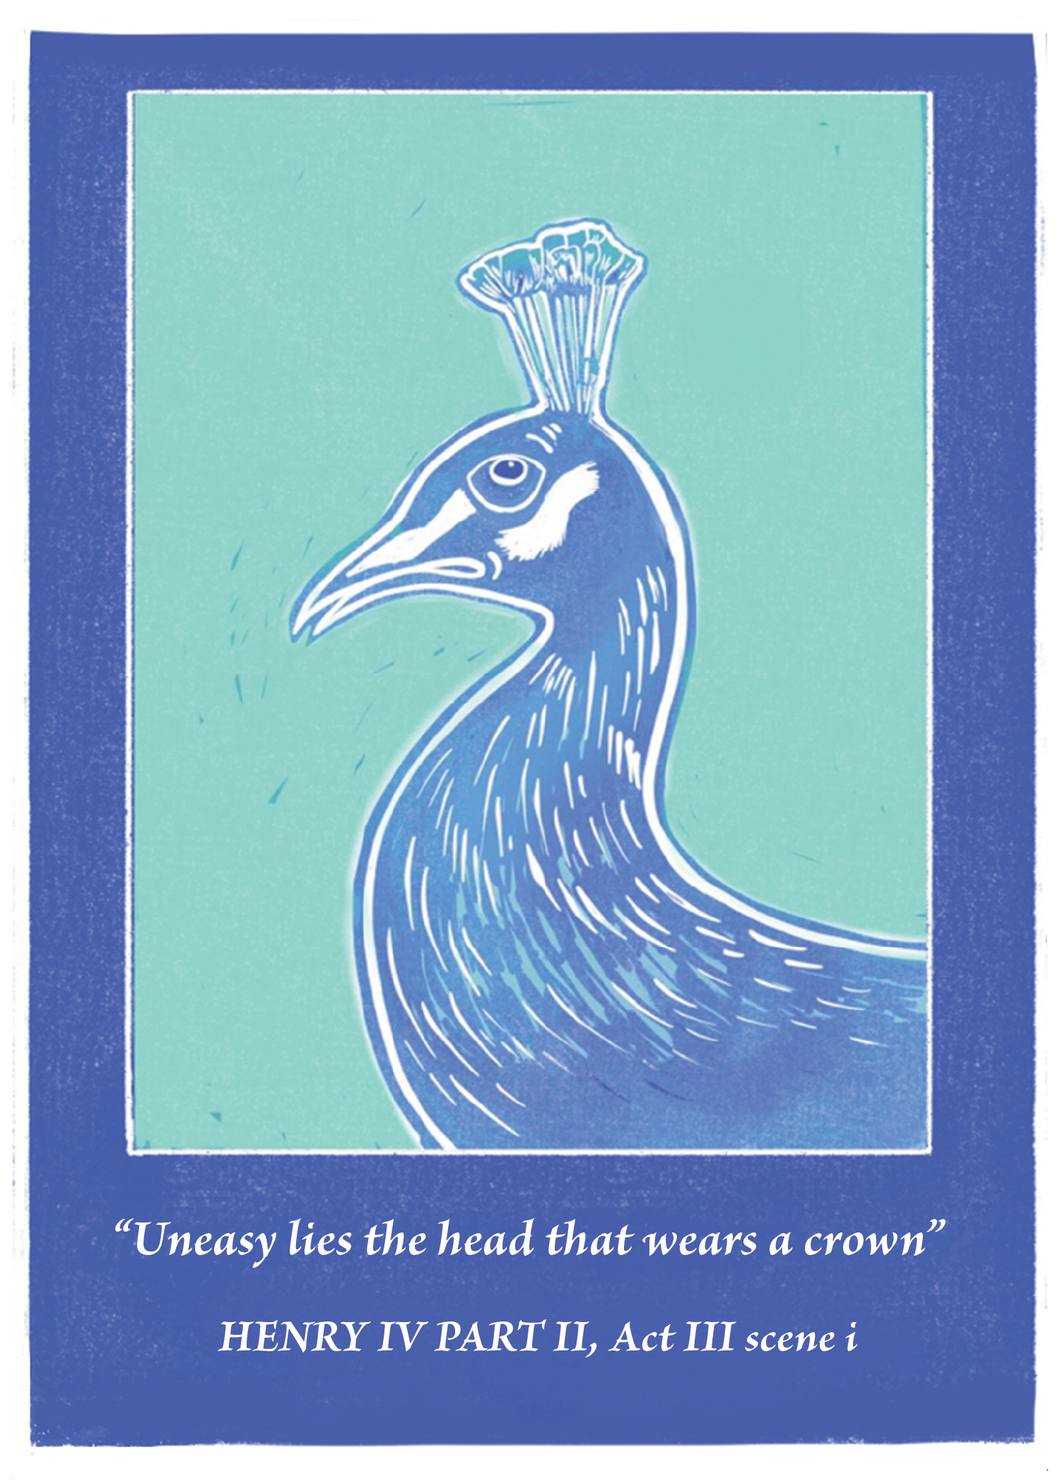 UNEASY LIES THE HEAD THAT WEARS A CROWN - folded card